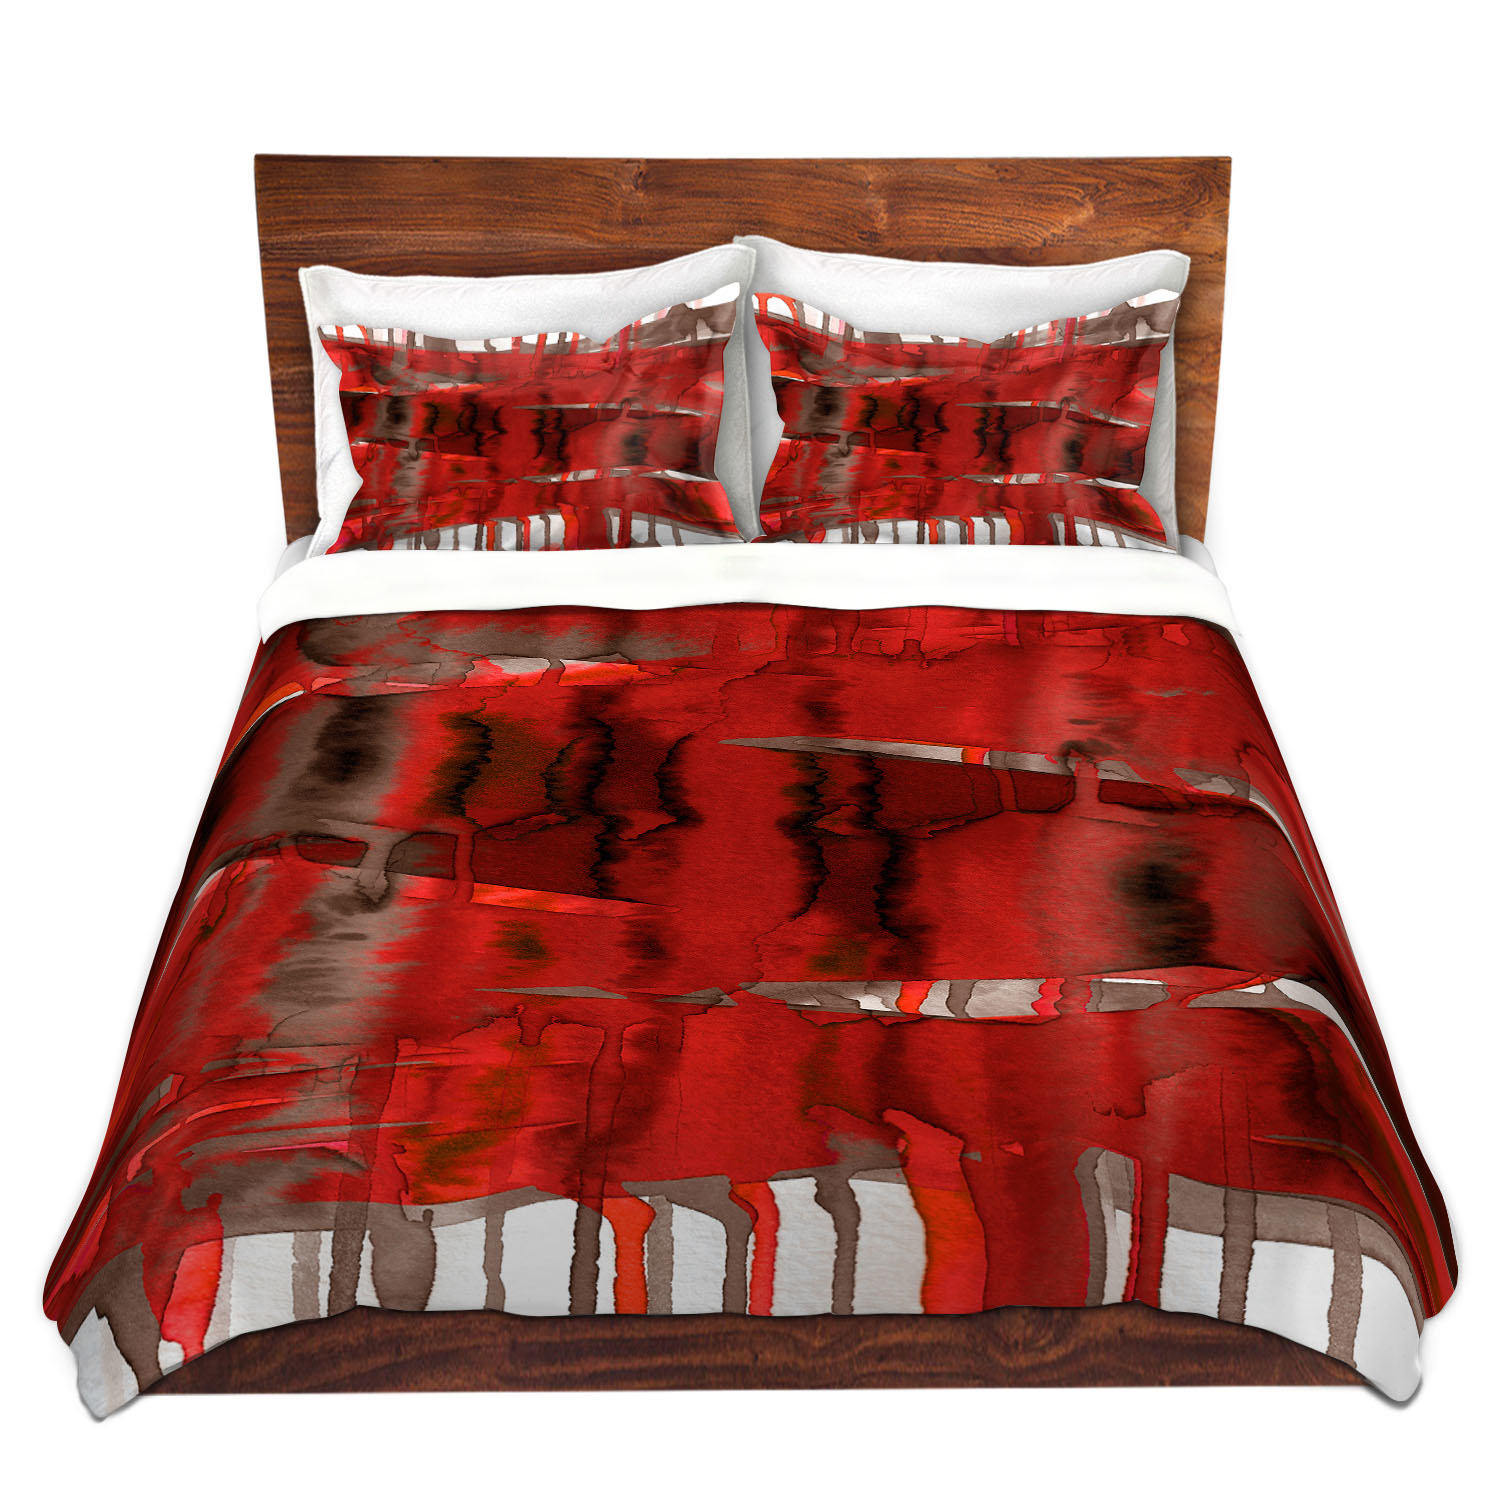 Dianoche Microfiber Duvet Covers By Julia Di Sano - Balancing Act Bright Red